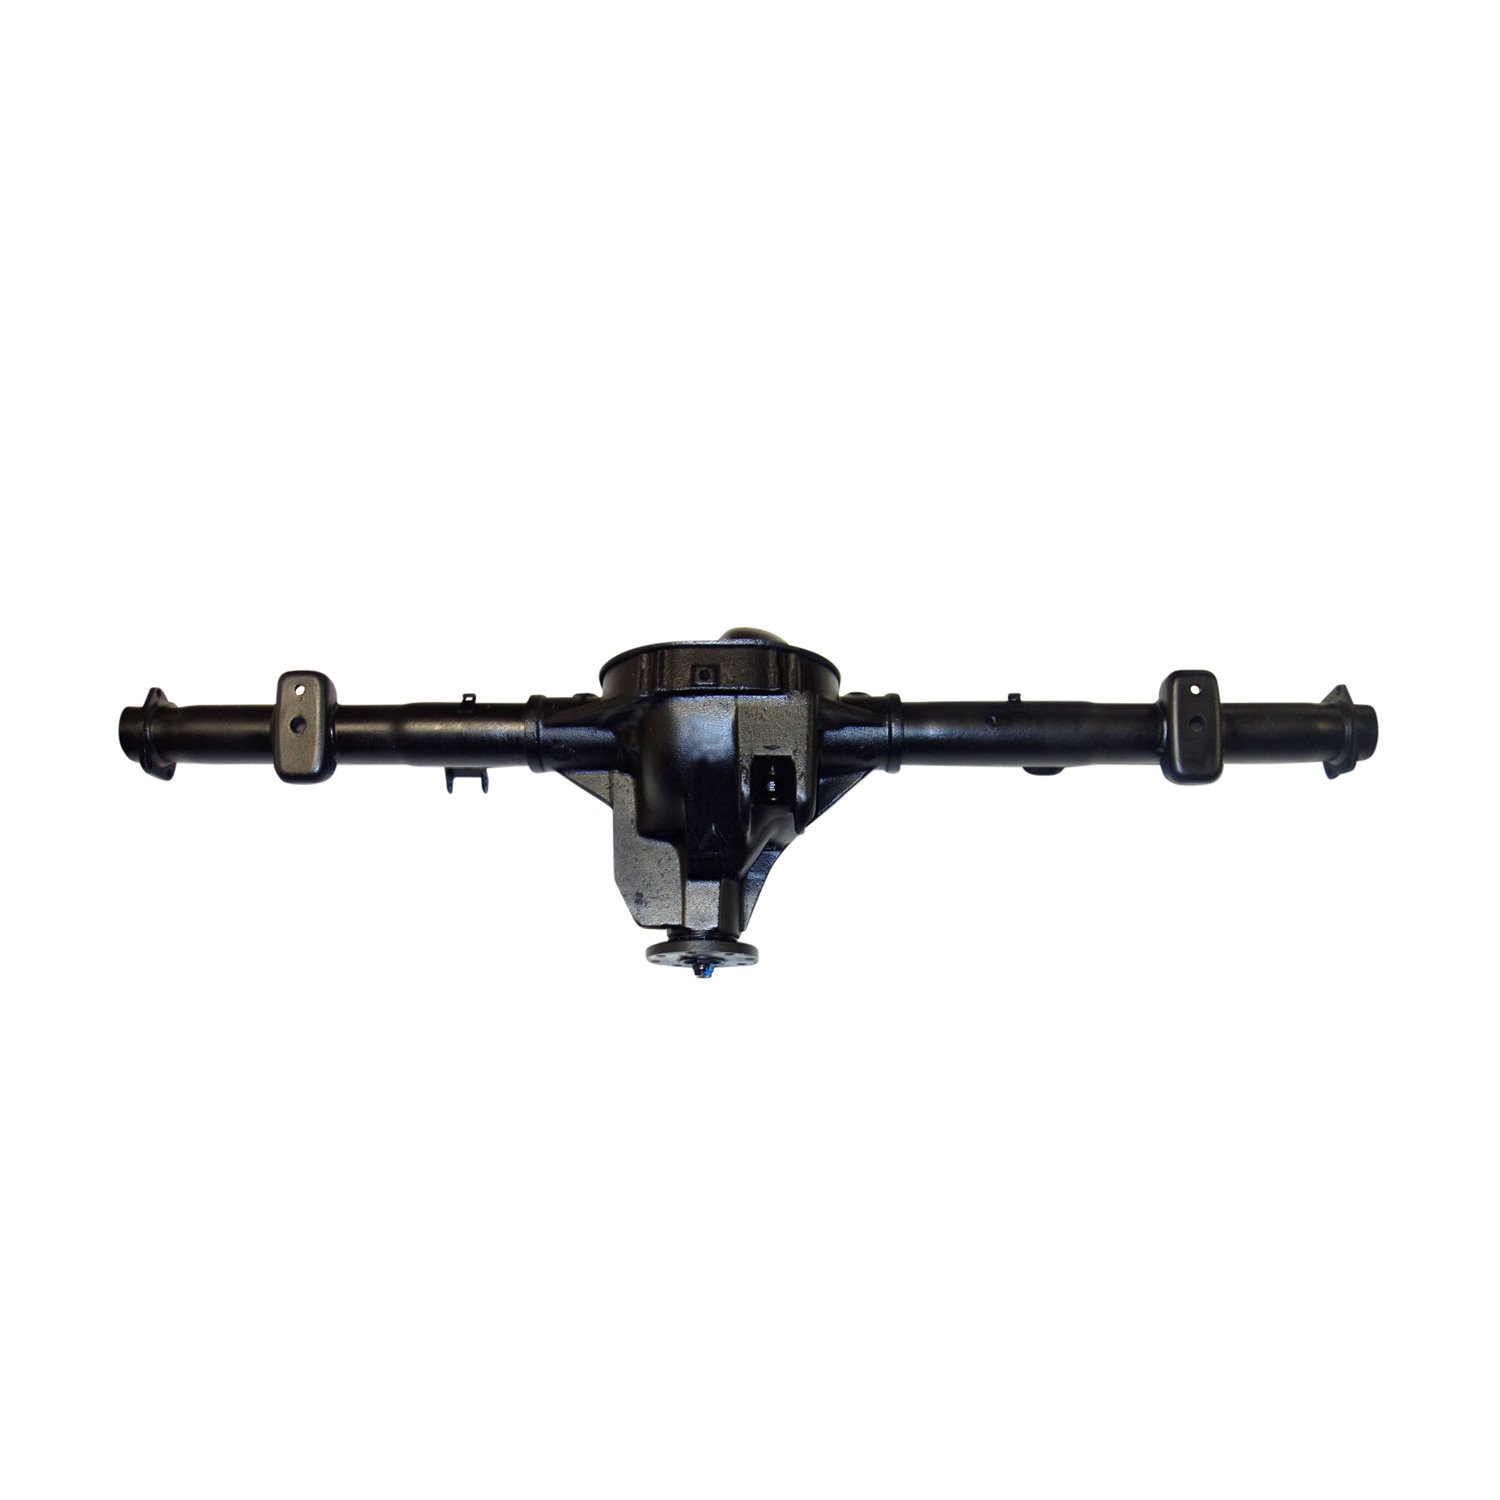 Remanufactured Complete Axle Assy for 8.8" 91-94 & Mazda Explorer & Navajo 3.08 with ABS